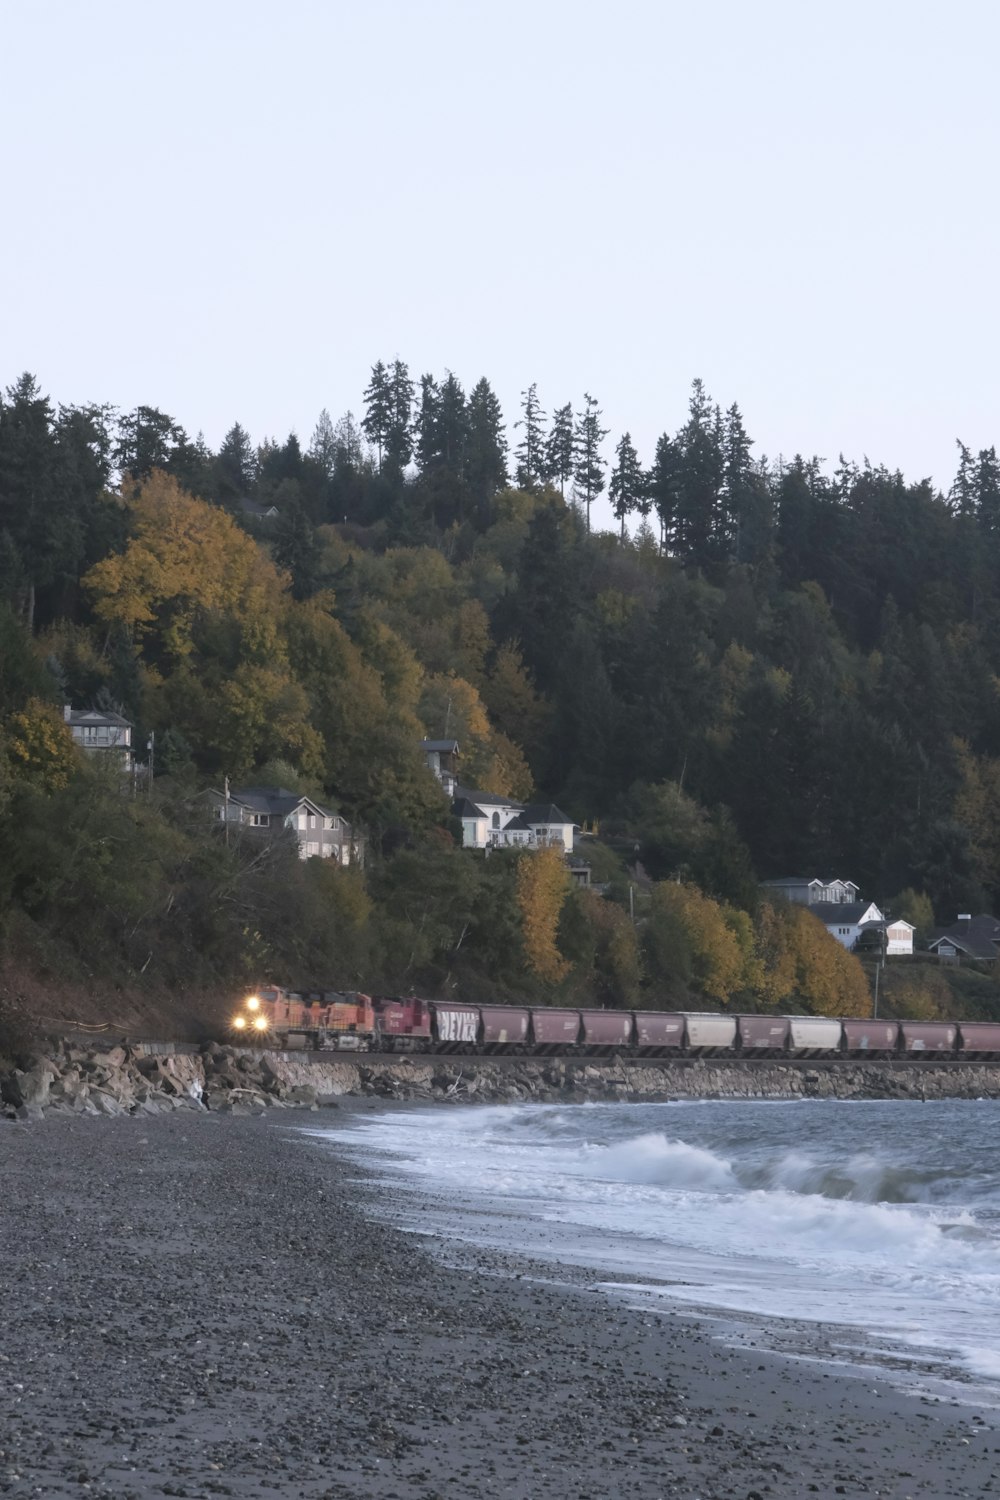 a train on a train track next to a body of water